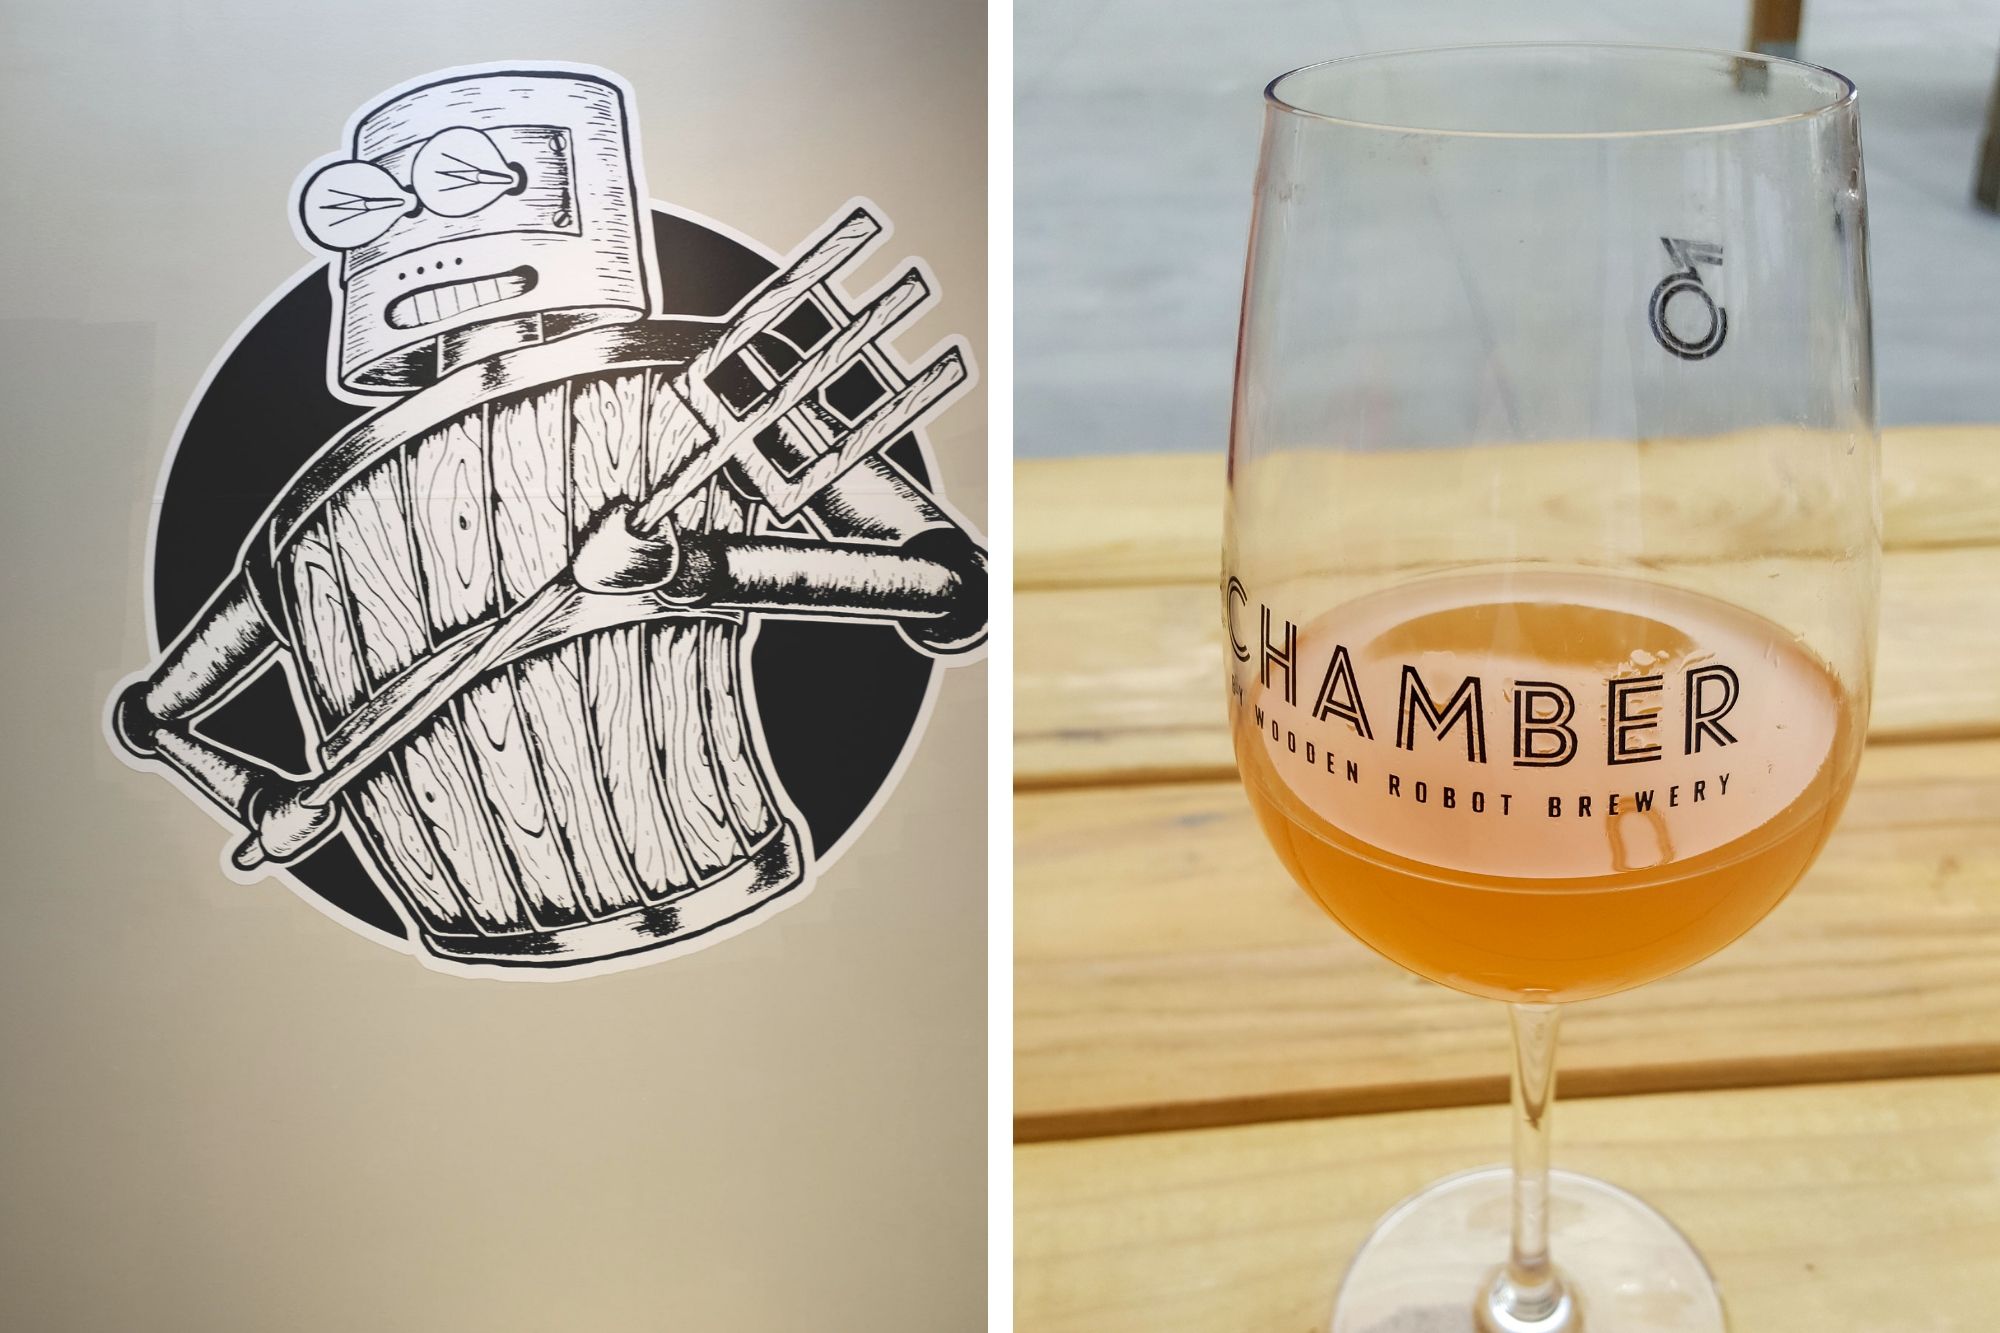 Wooden Robot logo and a beer from the Chamber location